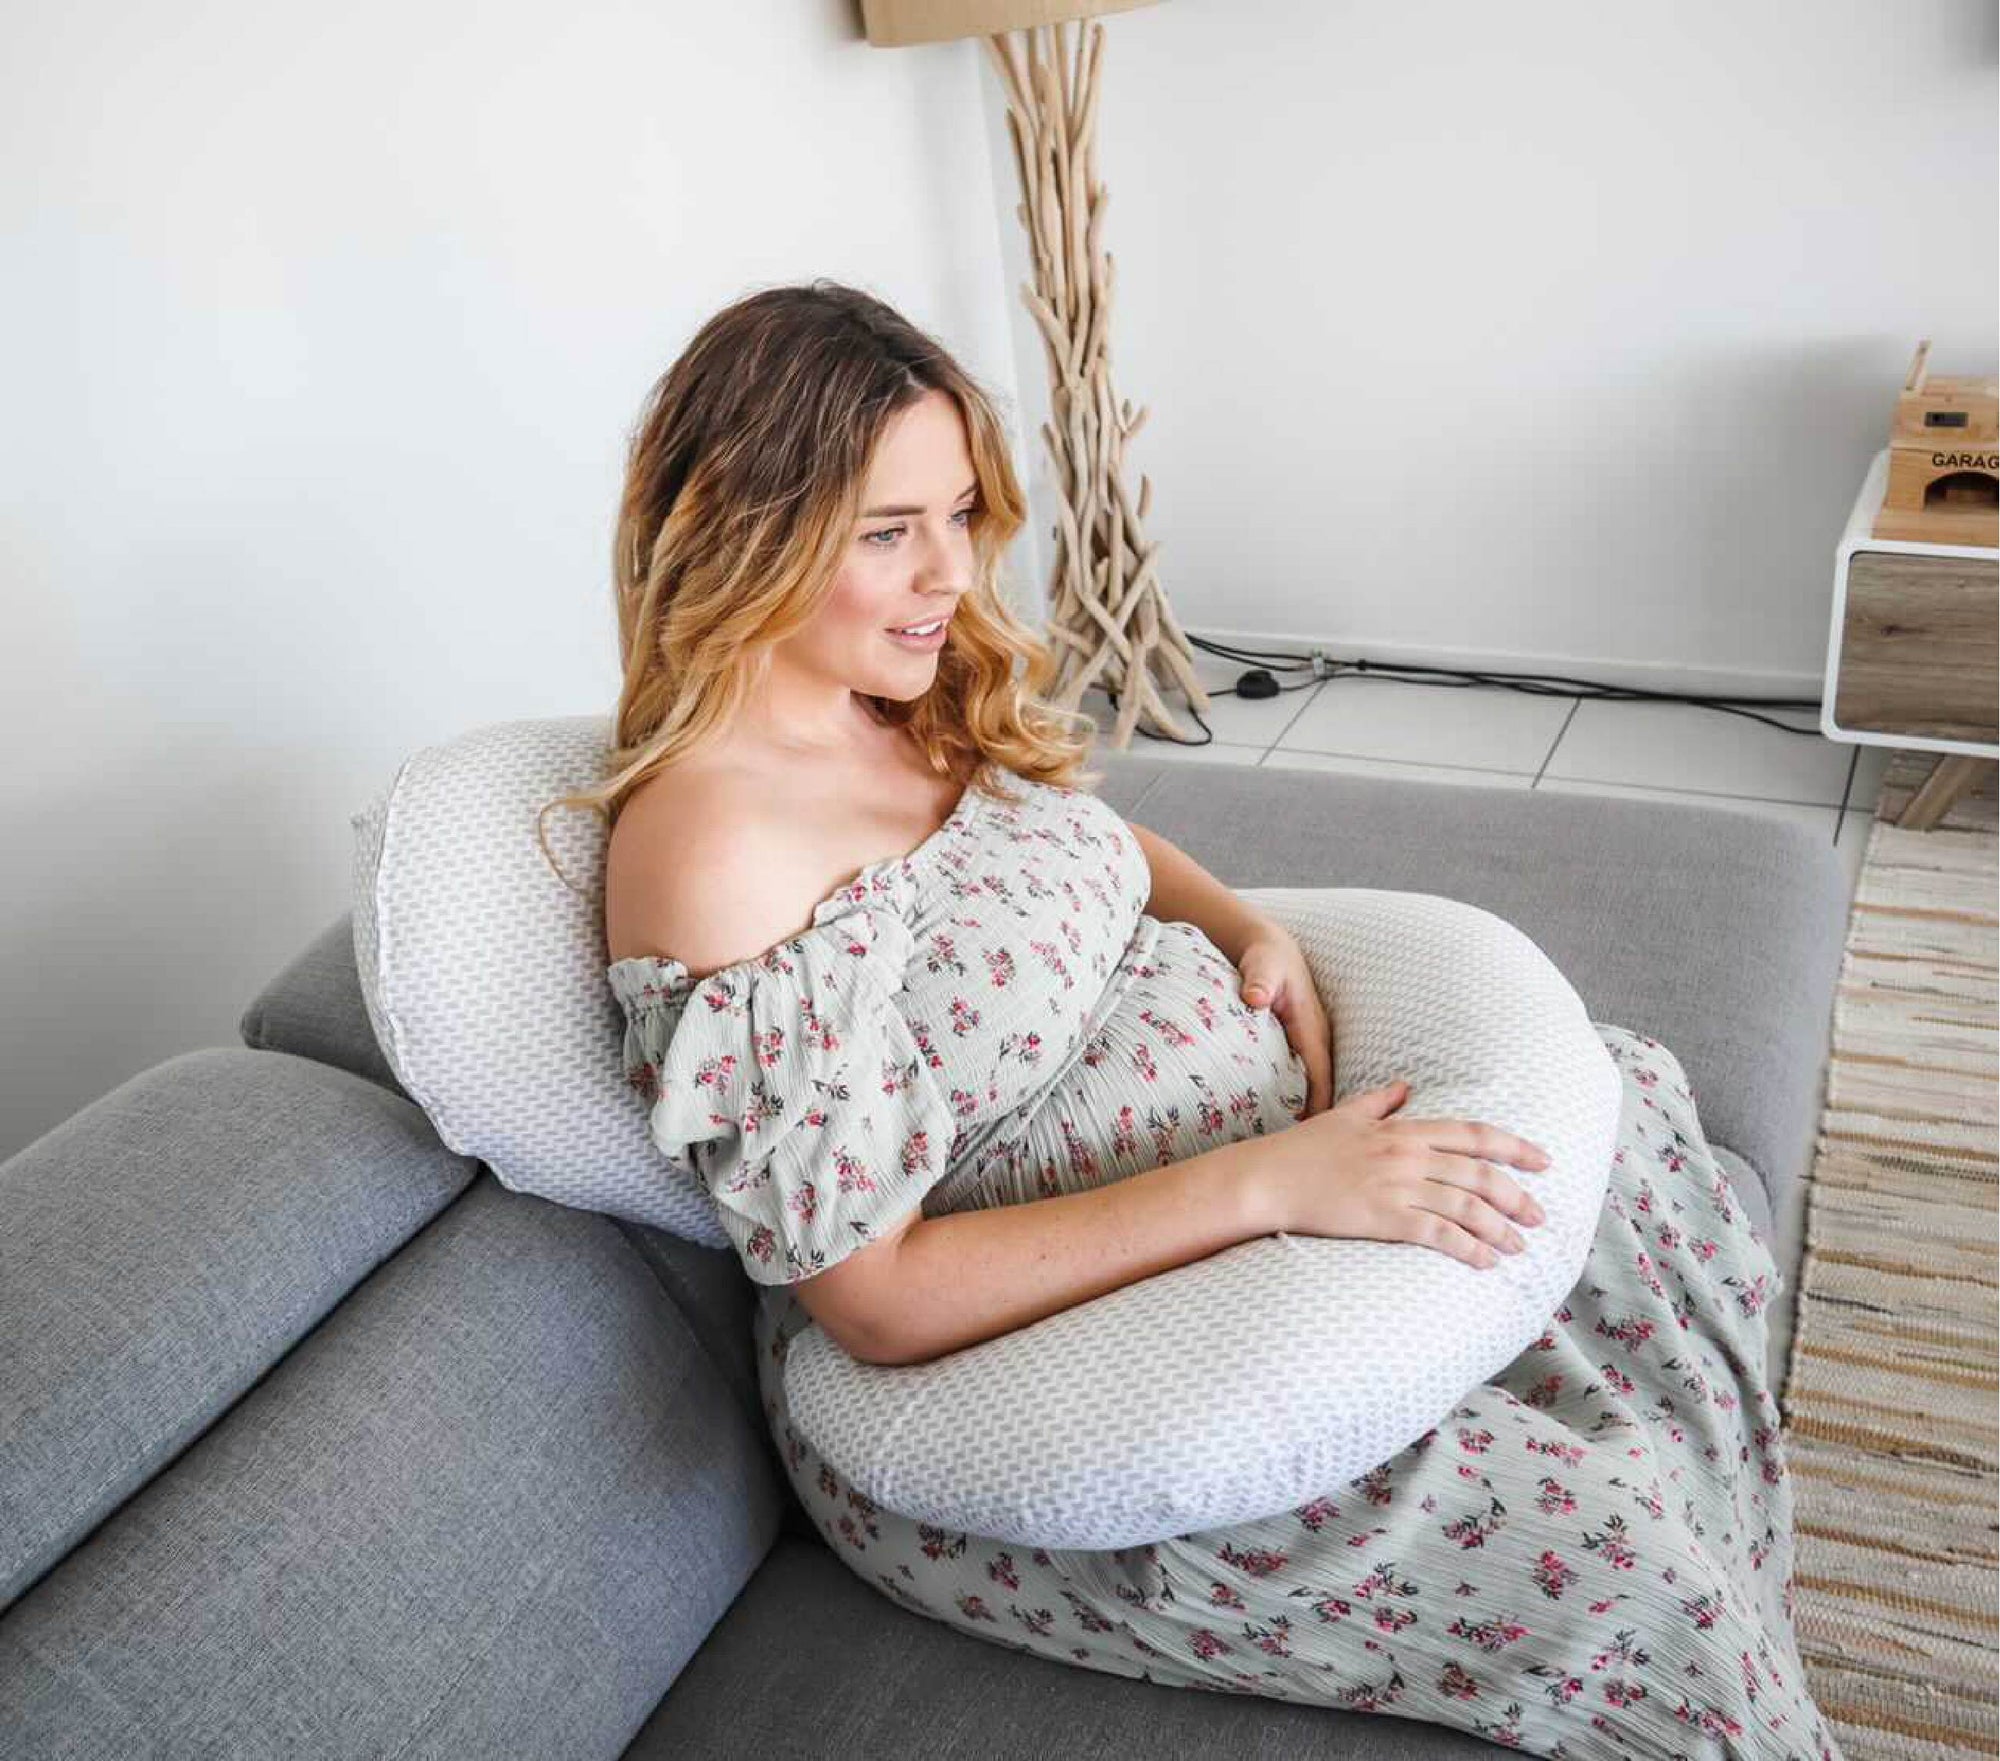 ultimate body / breast feeding pillow with chevron grey pillow case